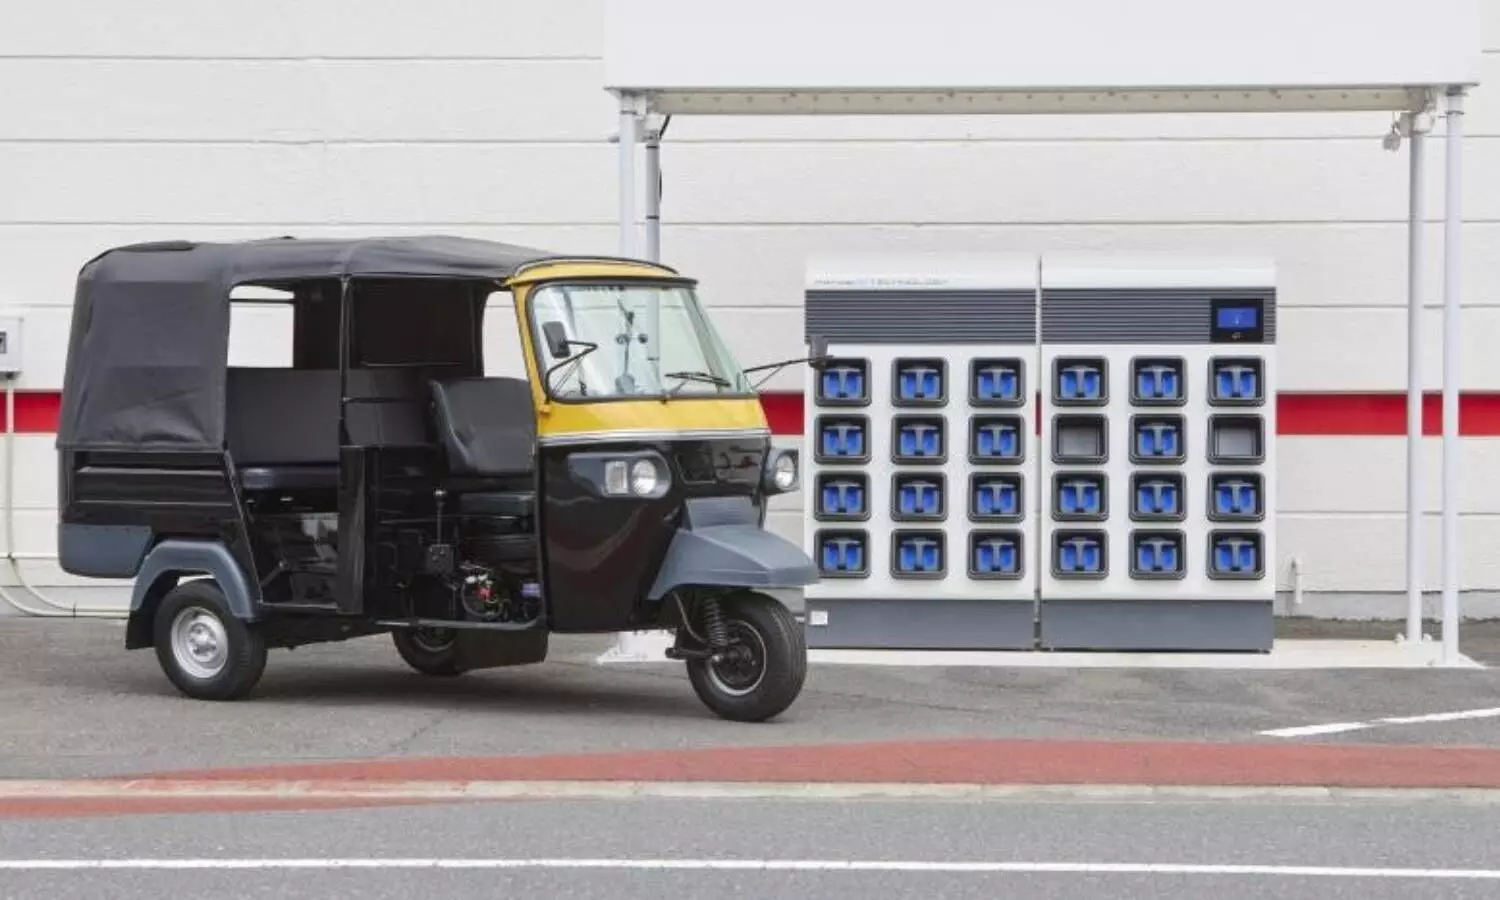 Honda to launch battery service for electric tricycle taxis